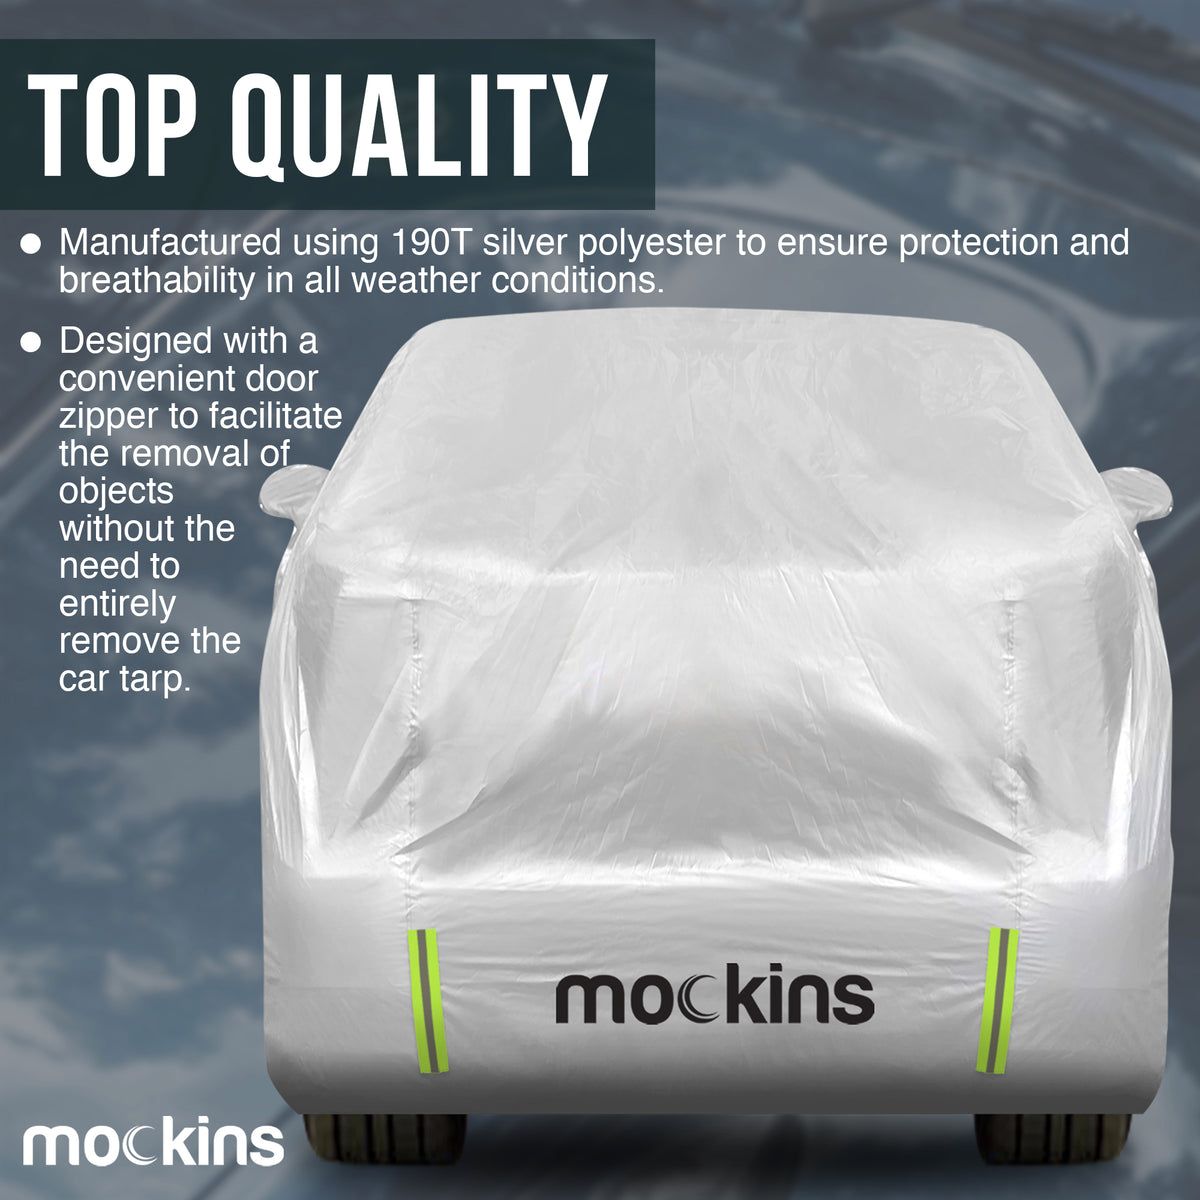 Mockins SUV Covers Are Manufactured Using 190T Silver Polyester And Designed With A Convenient Door Zipper